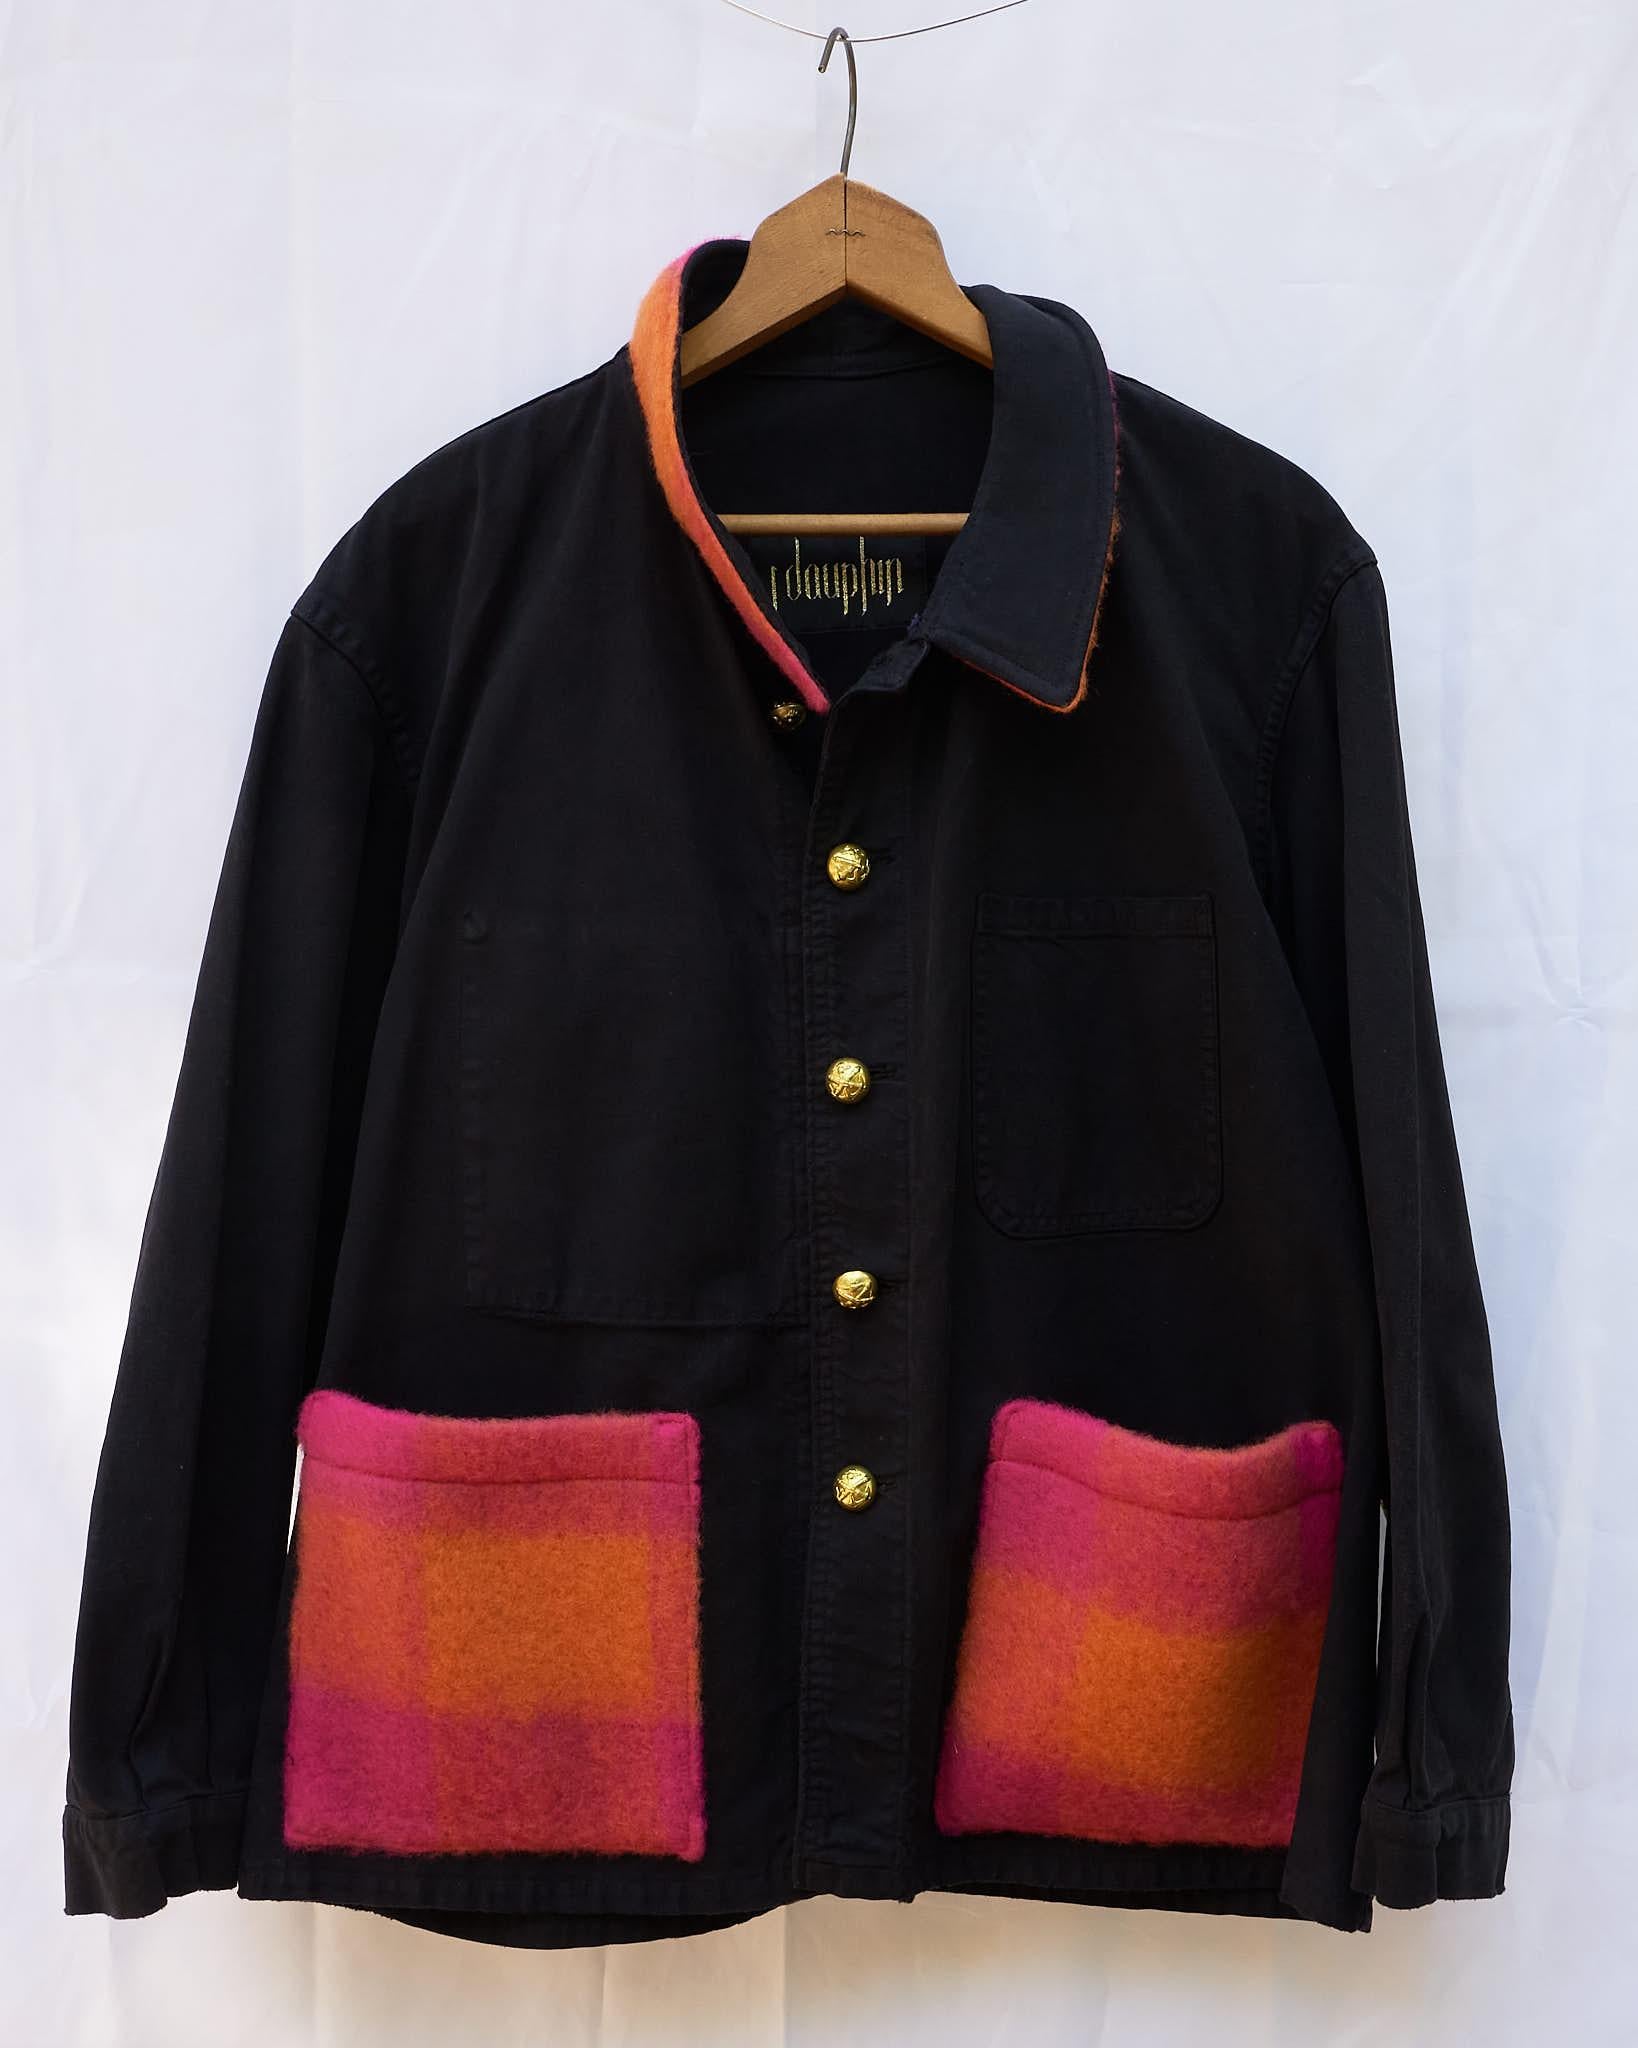 Original Vintage French Workwear Jacket Repurposed and Embellished with Orange and Pink Wool Pockets and Collar, Details of Gold Lurex Tweed along sleeves.
Original Military Vintage Gold tone Buttons in brass
Size: Large

Brand: J